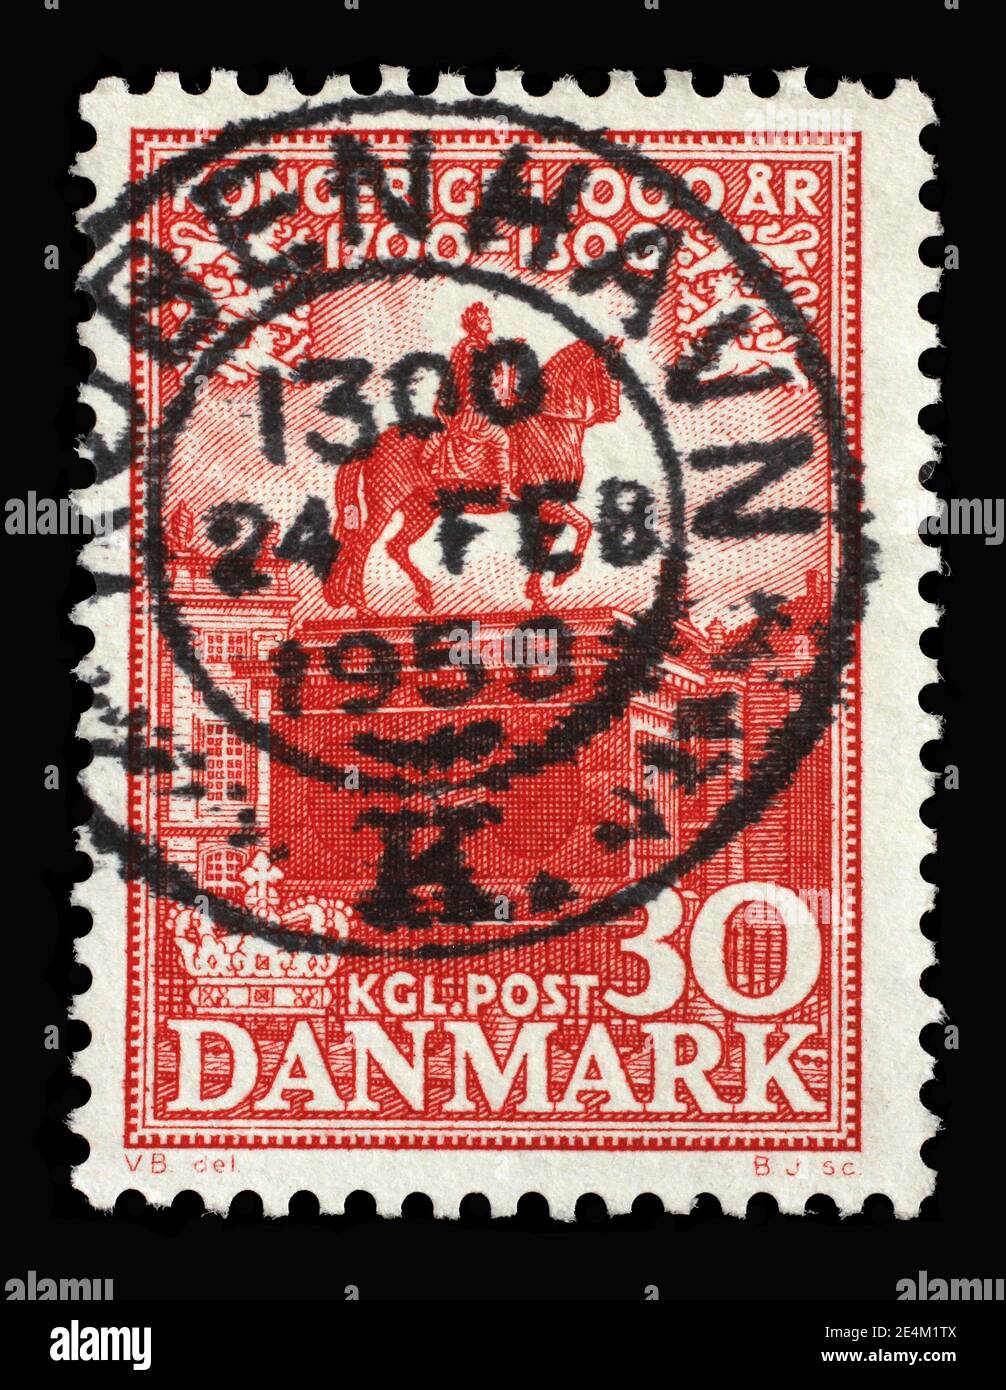 Stamp printed in Denmark shows statue of King Frederik V in front of Amalienborg Palace, Series 1000 years of Danish Kingdom, circa 1955 Stock Photo